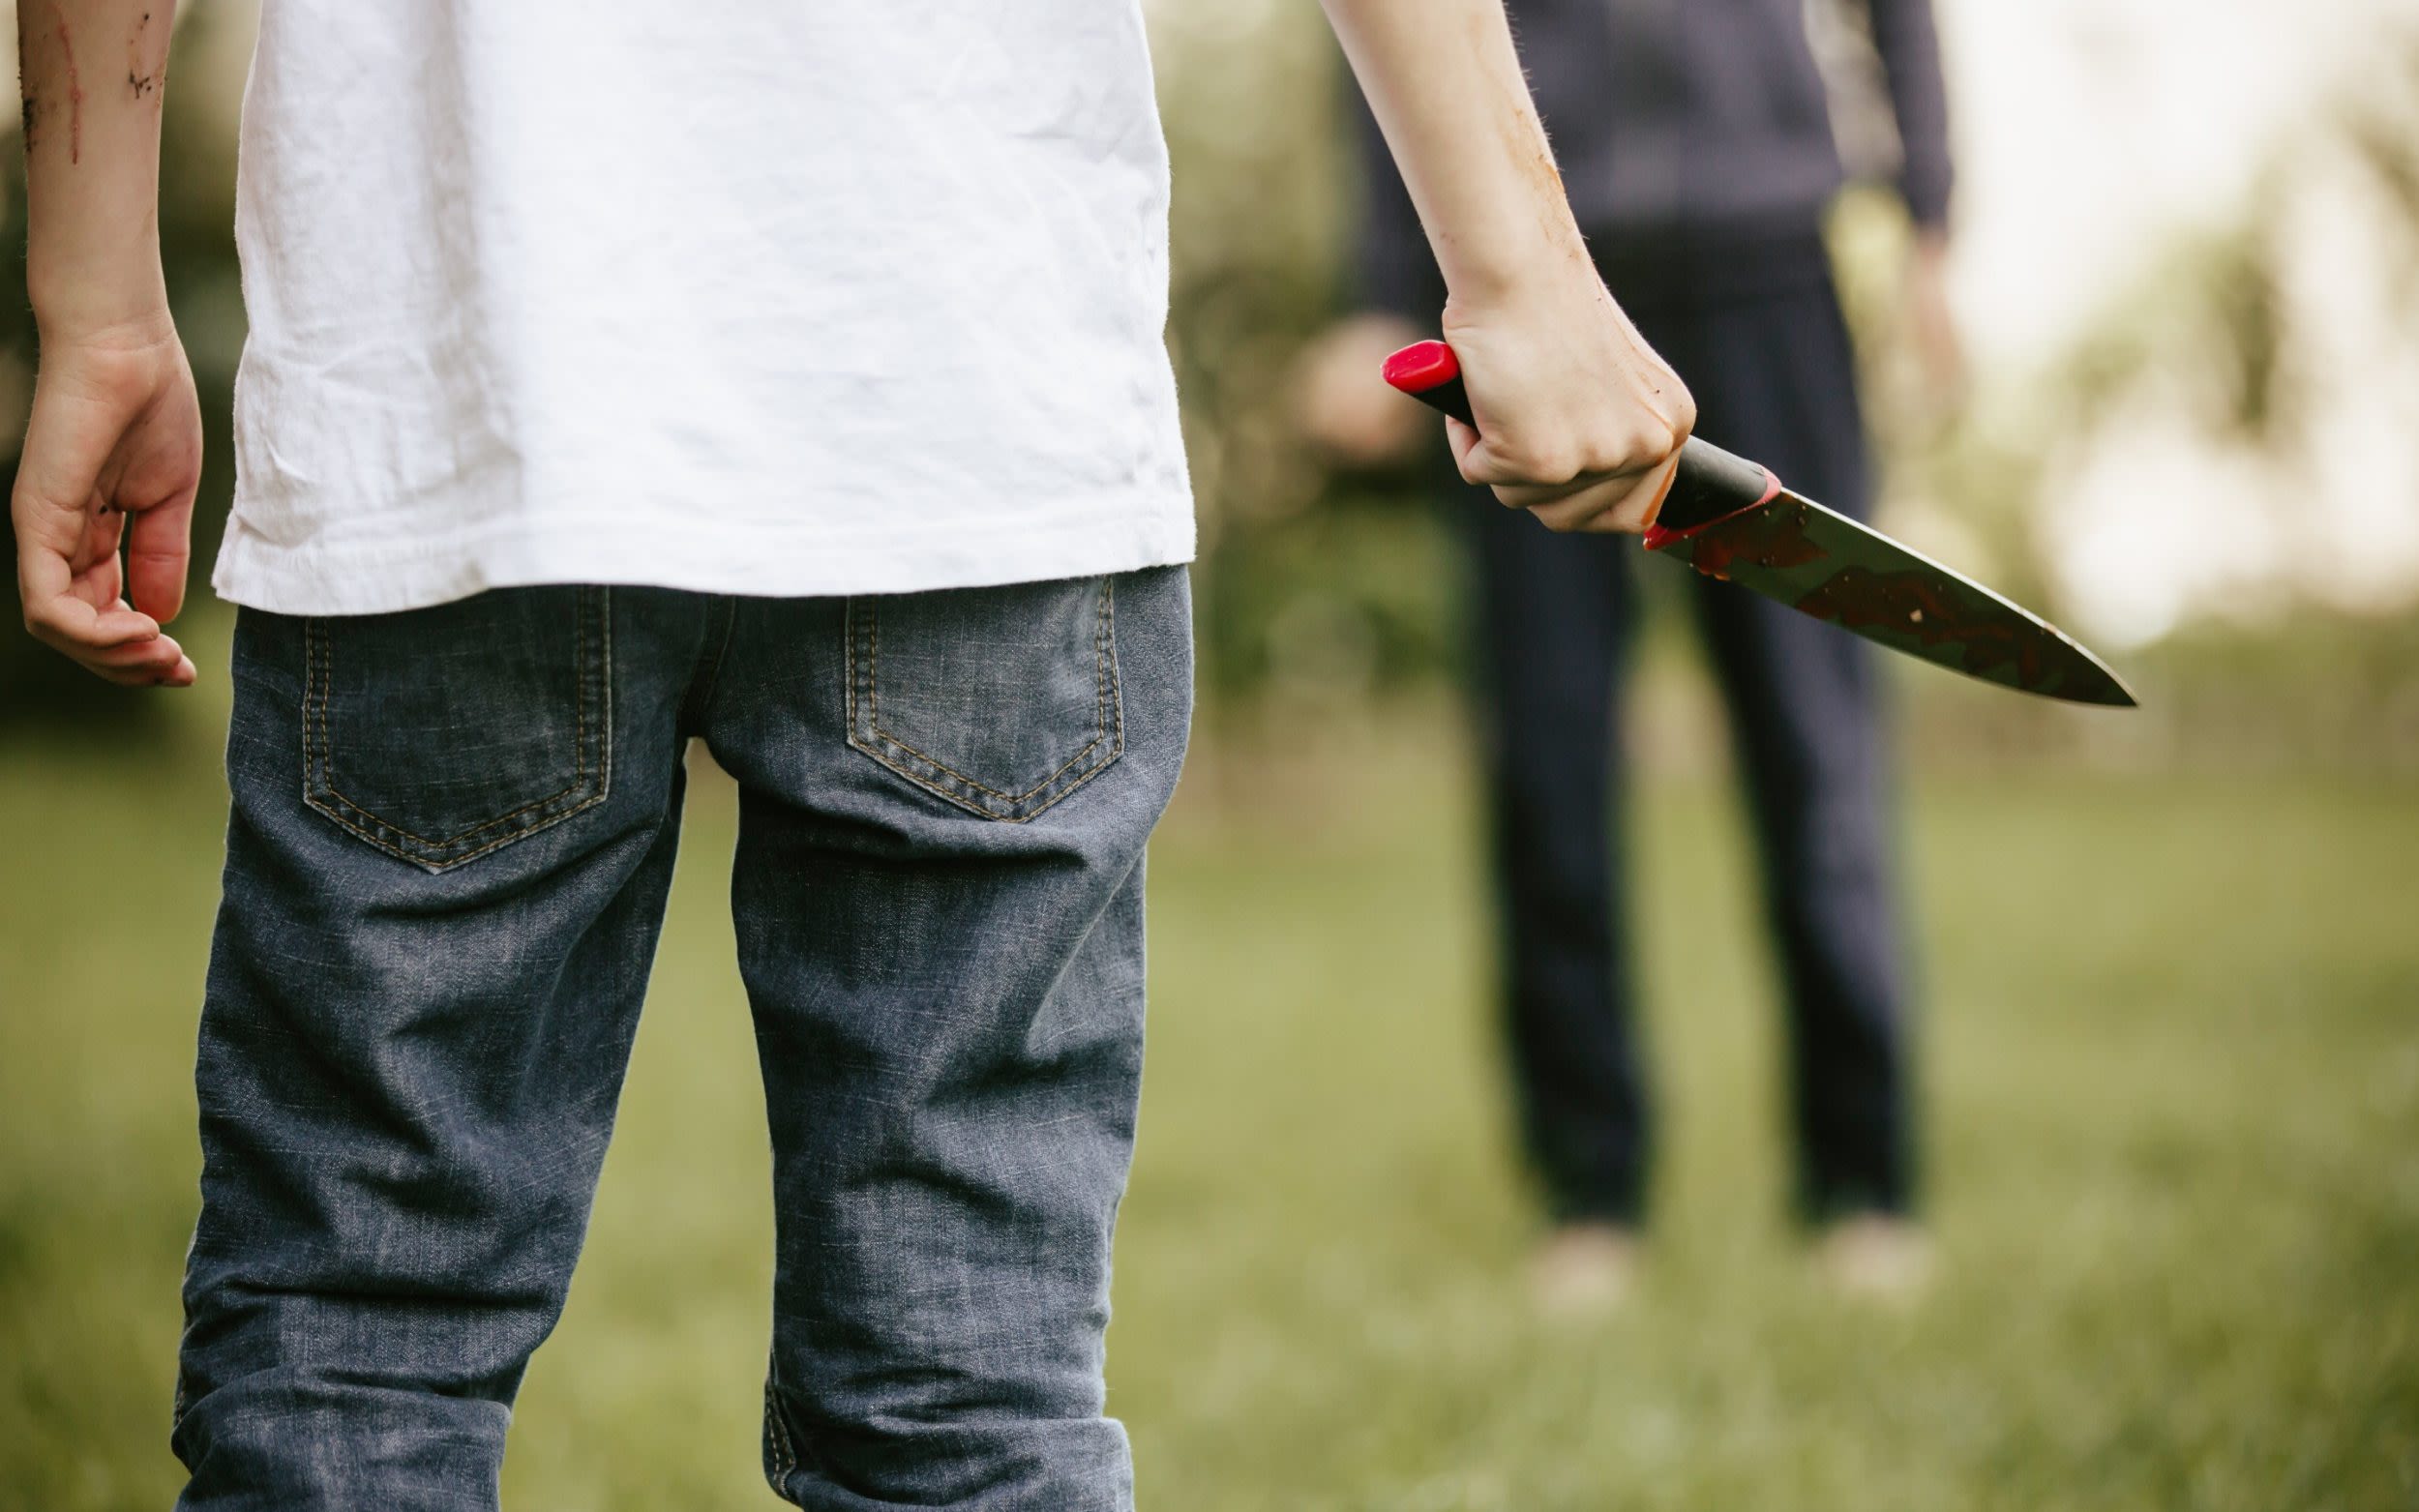 One in 20 children has carried a knife outside home, survey finds